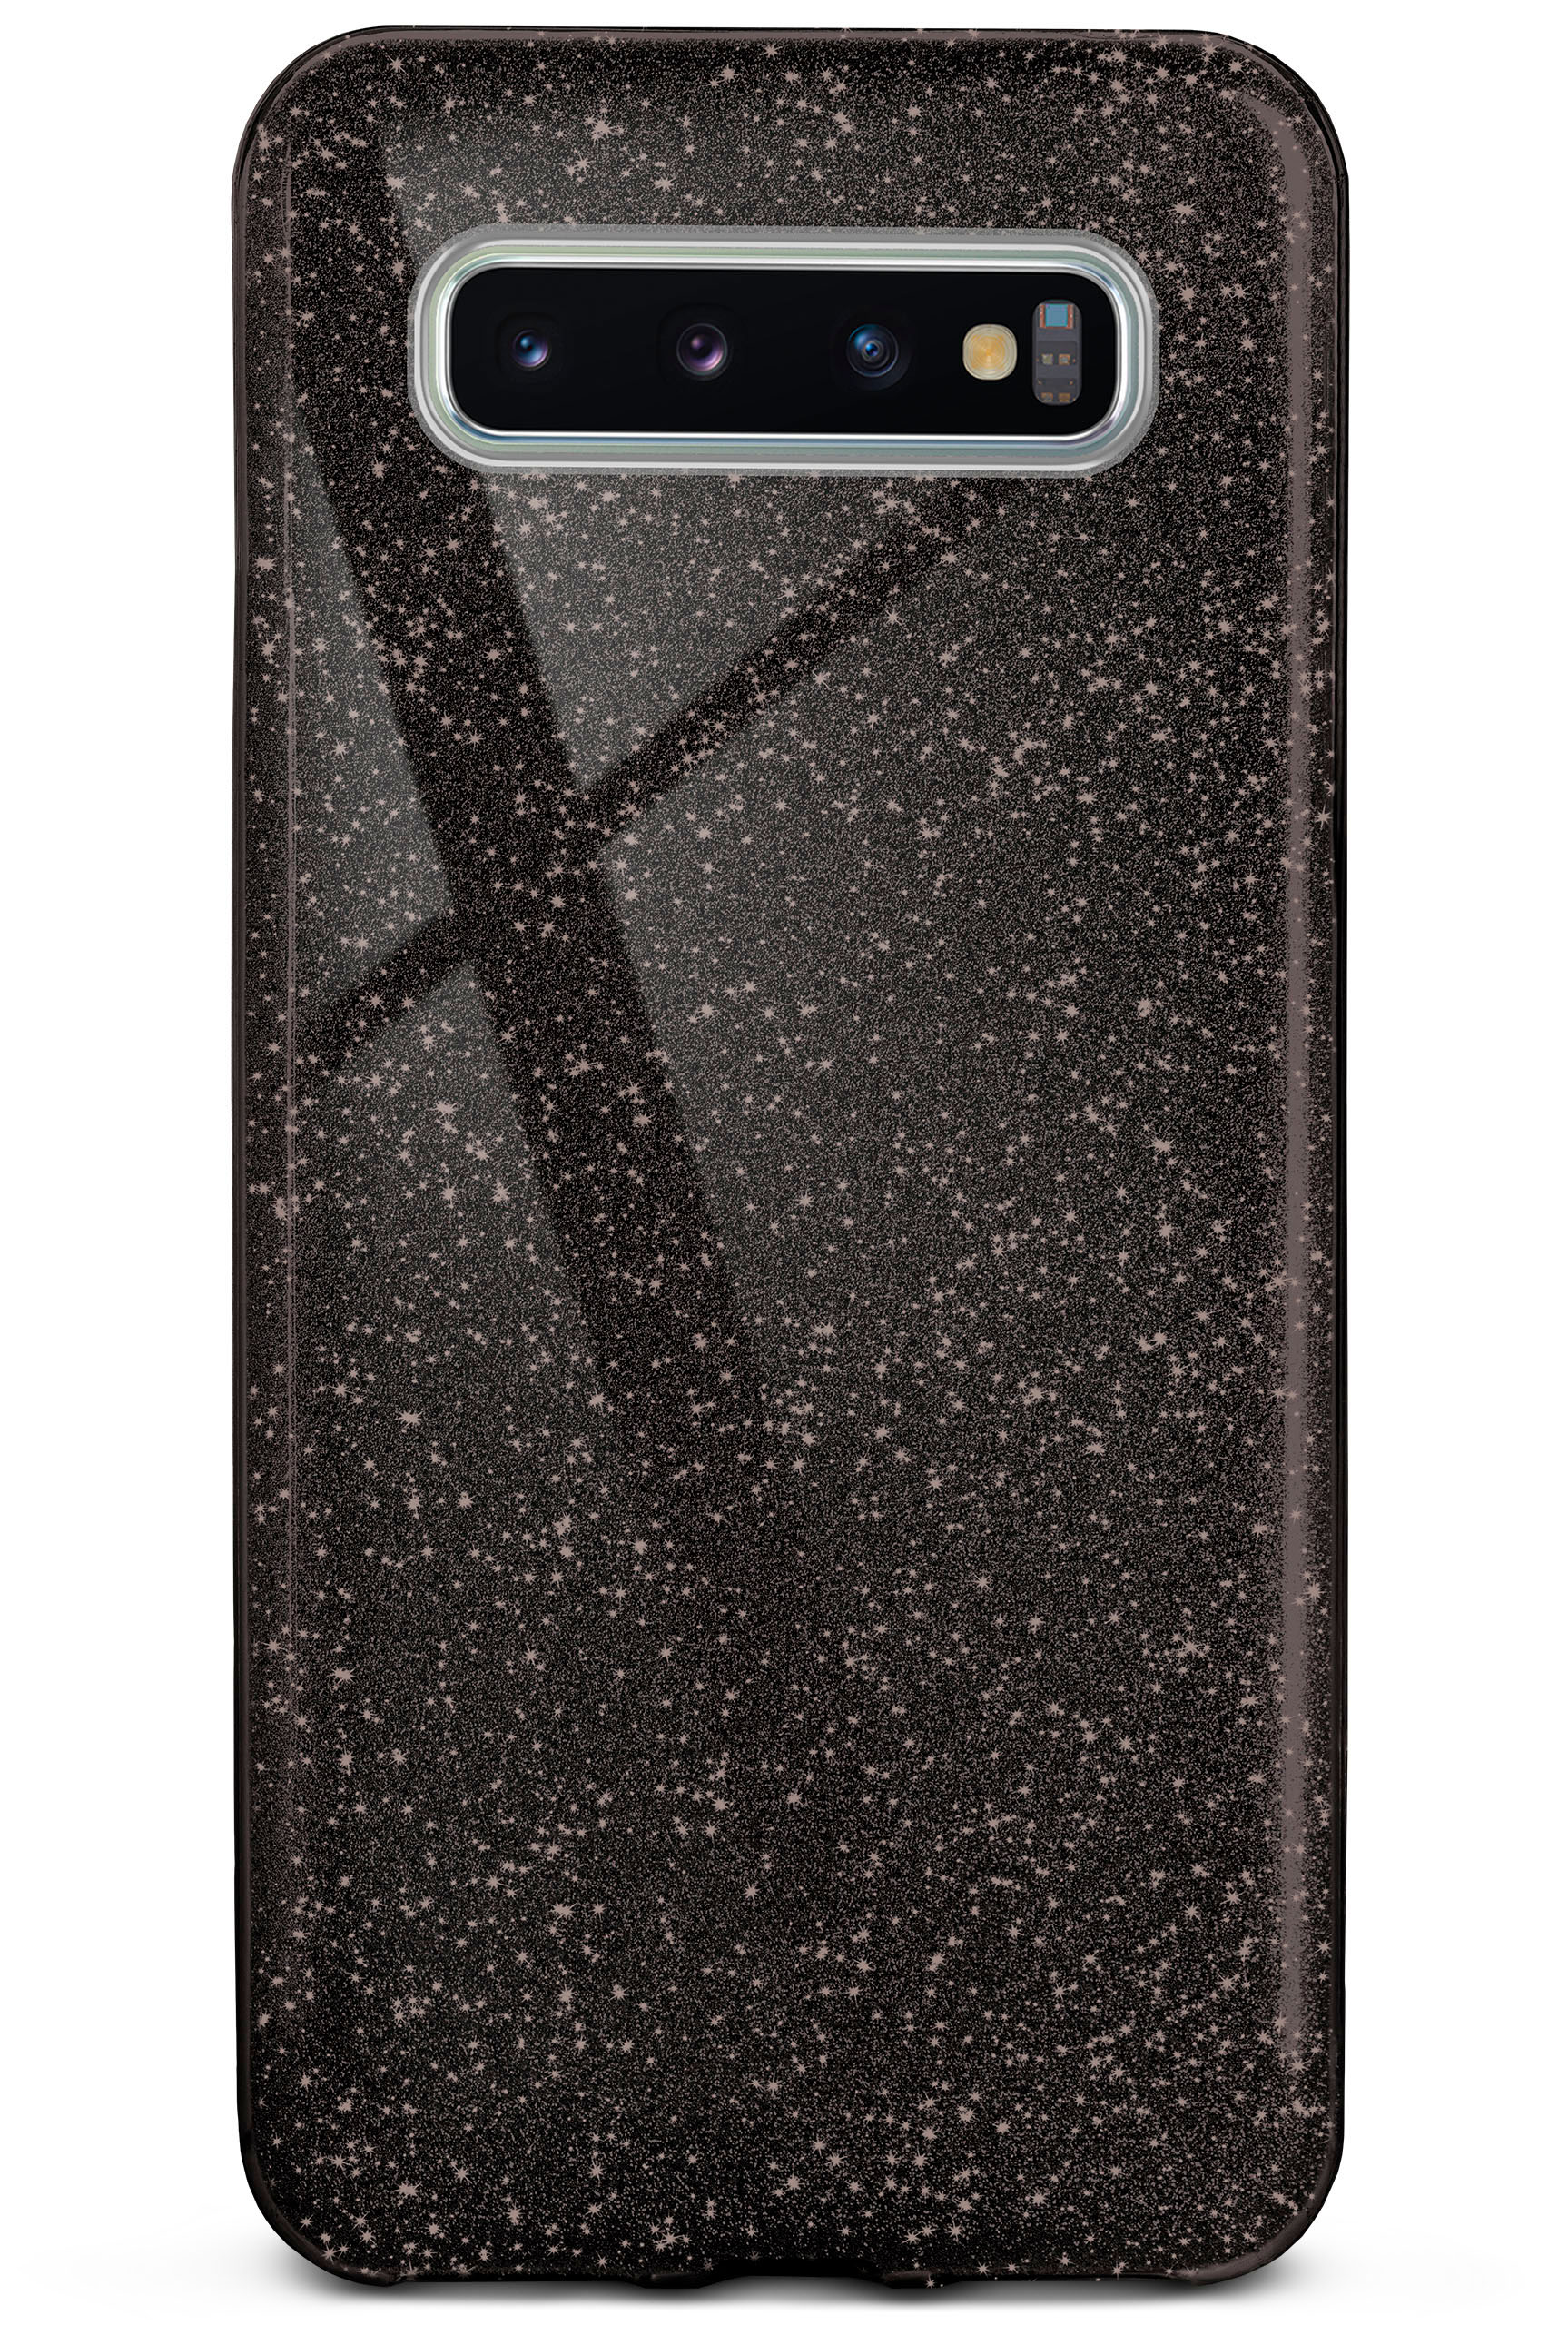 ONEFLOW Glitter - S10 Case, Glamour Black Plus, Galaxy Backcover, Samsung,